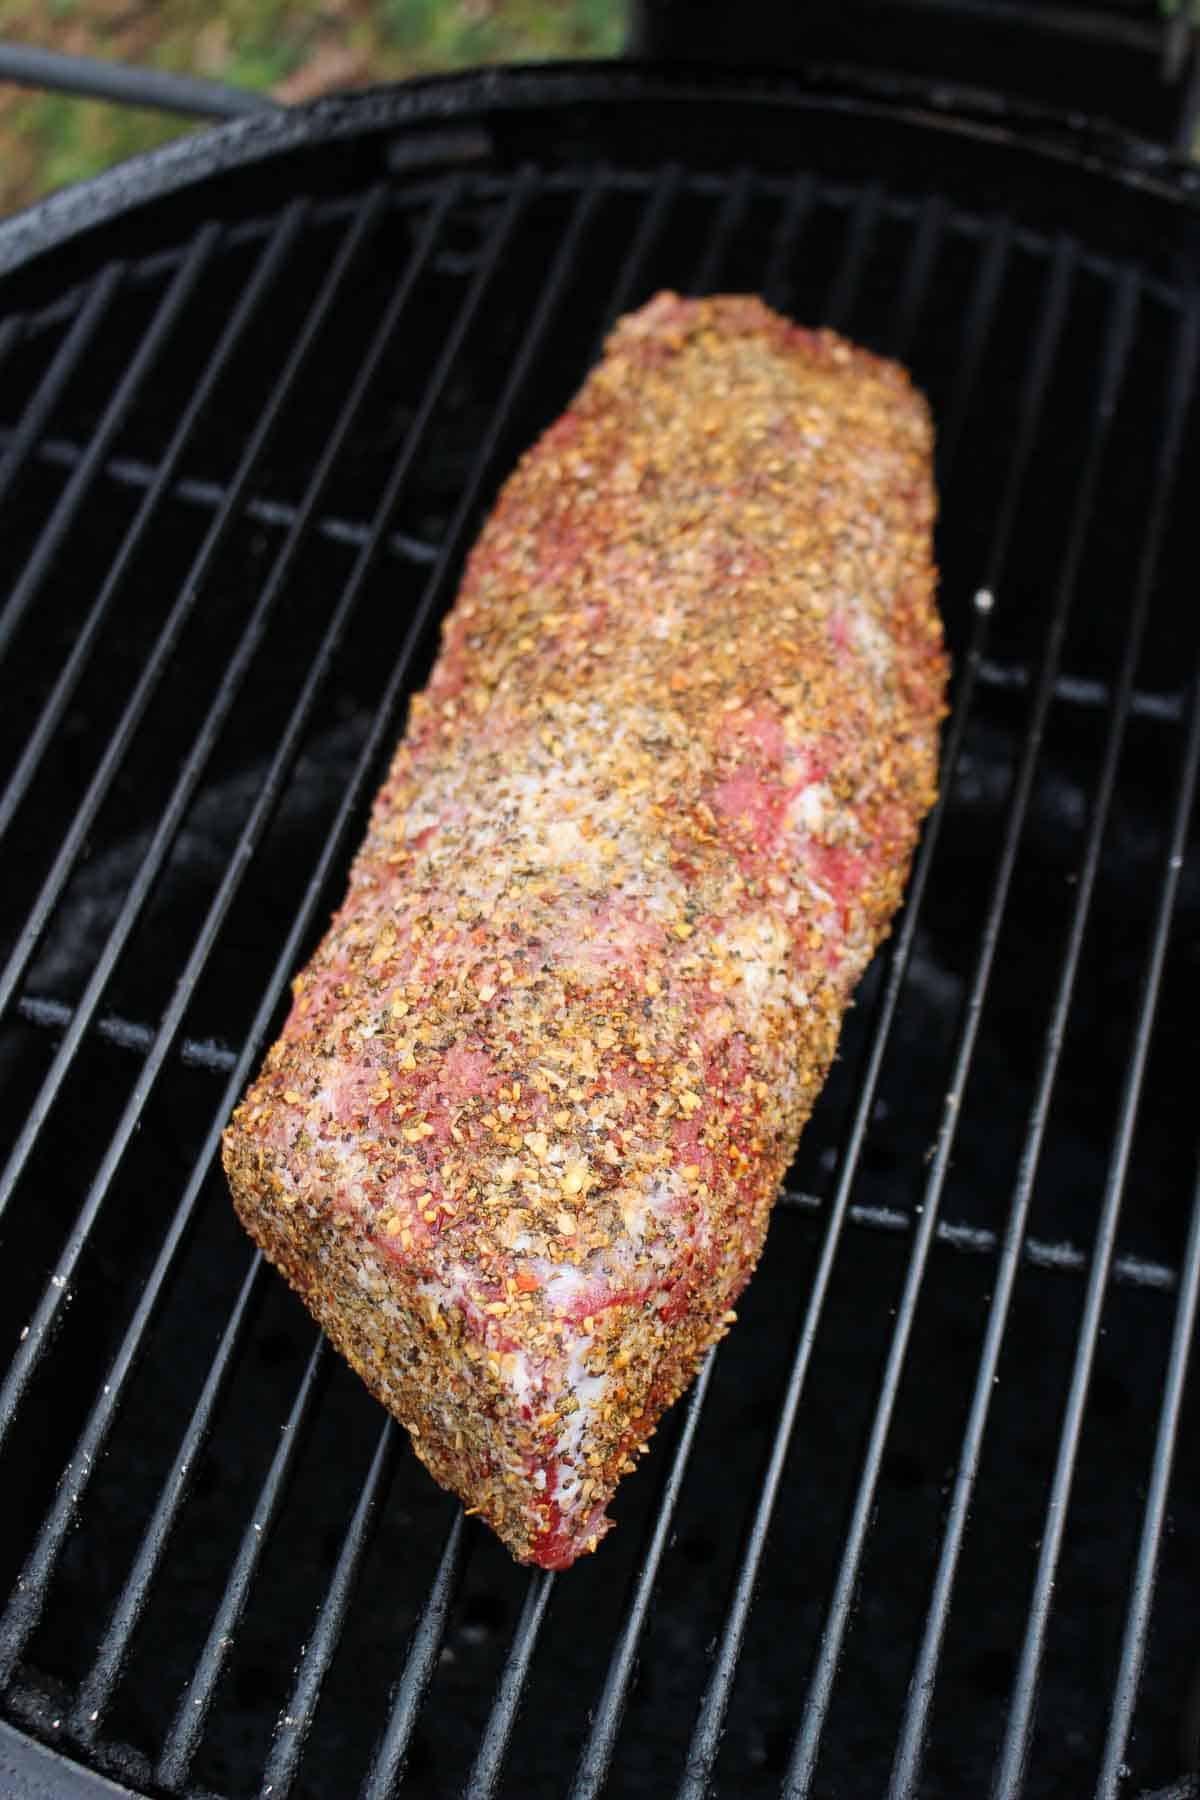 The raw beef getting set on the smoker.